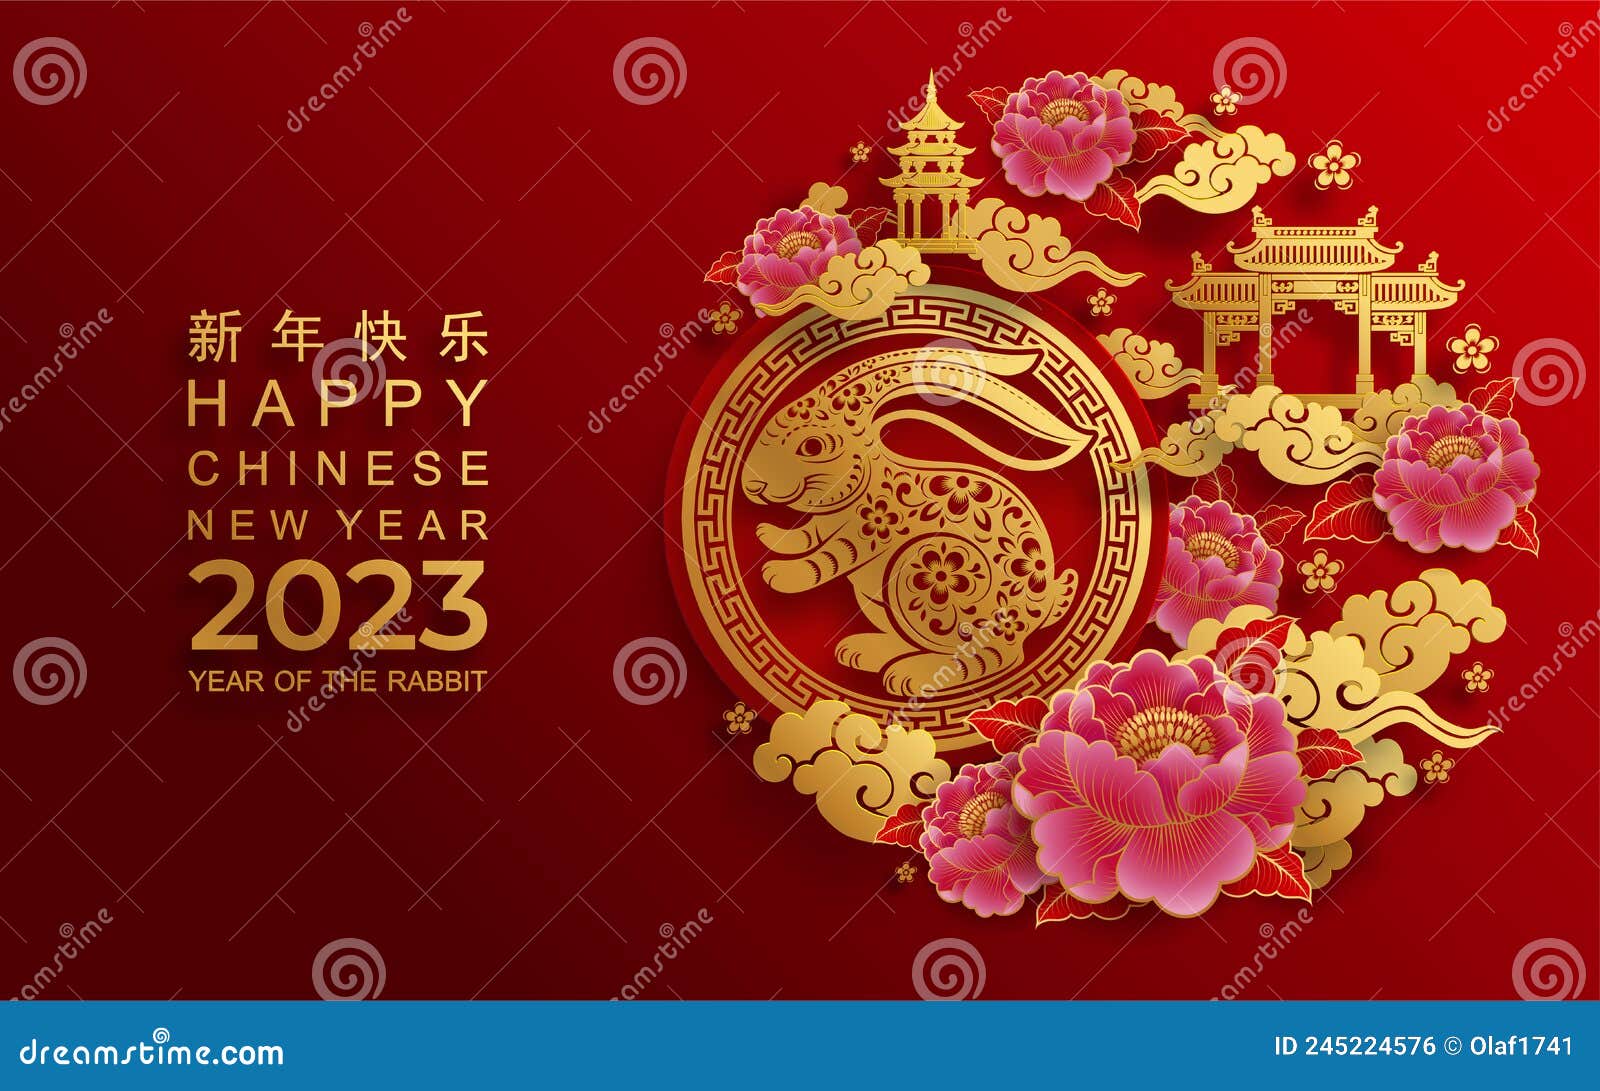 Happy Chinese New Year 2023 Year of the Rabbit Stock Vector - Illustration  of golden, asia: 245224576